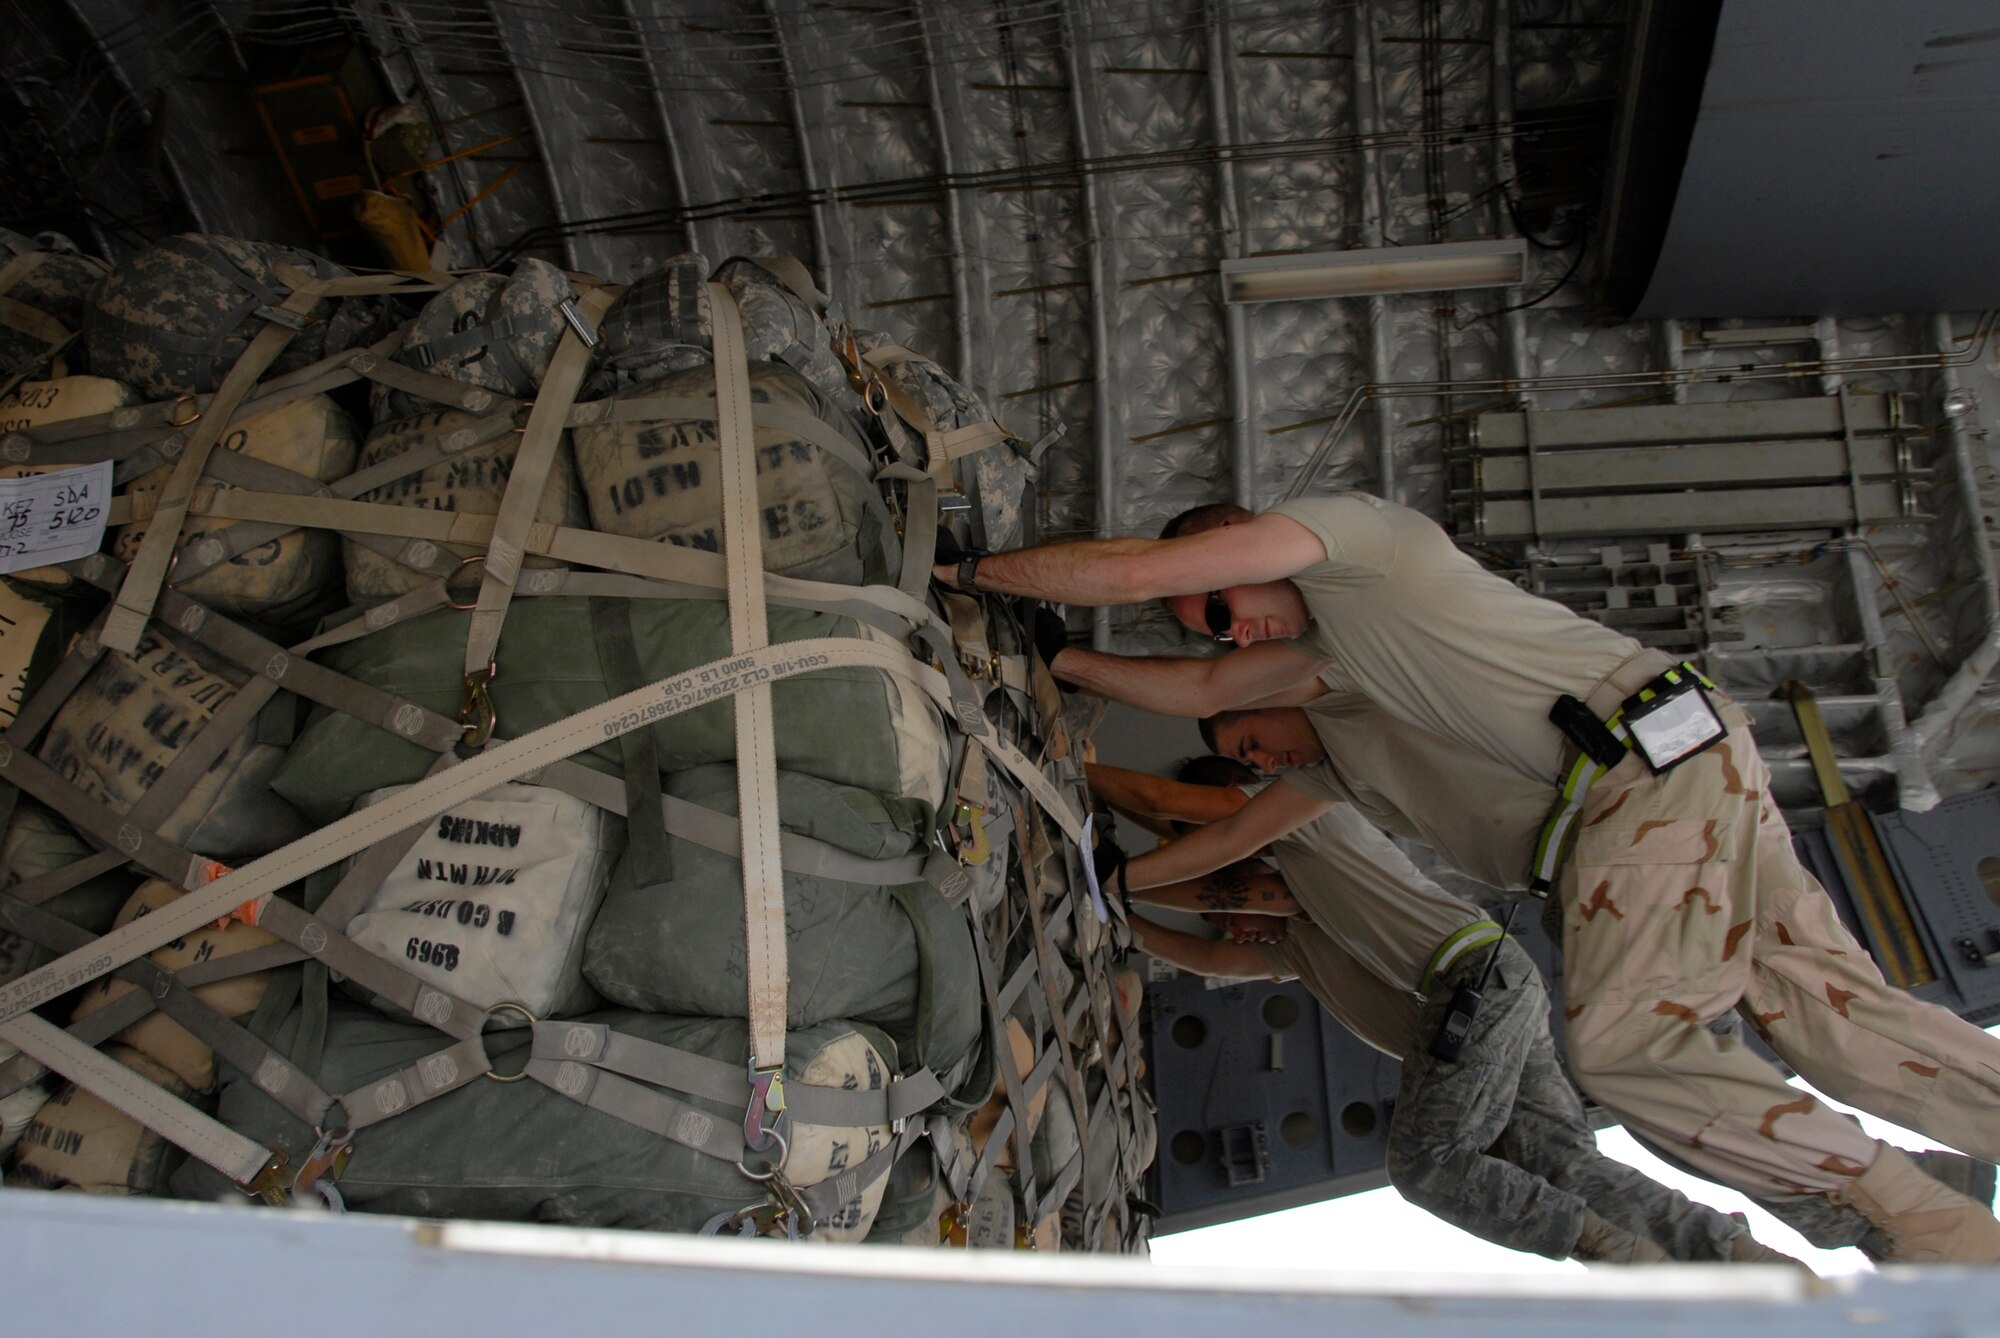 SOUTHWEST ASIA -- Airmen from the 386th Expeditionary Logistics Readiness Squadron's aerial port flight push a pallet onto a U.S. Air Force C-17 Globemaster III May 15, 2008, at an air base in the Persian Gulf Region. The aerial port flight handles all loading and unloading of military and coalition partners' aircraft departing and arriving the base and is responsible for processing all originating, through load, and terminating cargo. This flight is U.S. Central Command's largest passenger operation, handling more than 65,000 passengers a month in support of Operations Enduring and Iraqi Freedom. (U.S. Air Force photo/ Staff Sgt. Patrick Dixon)